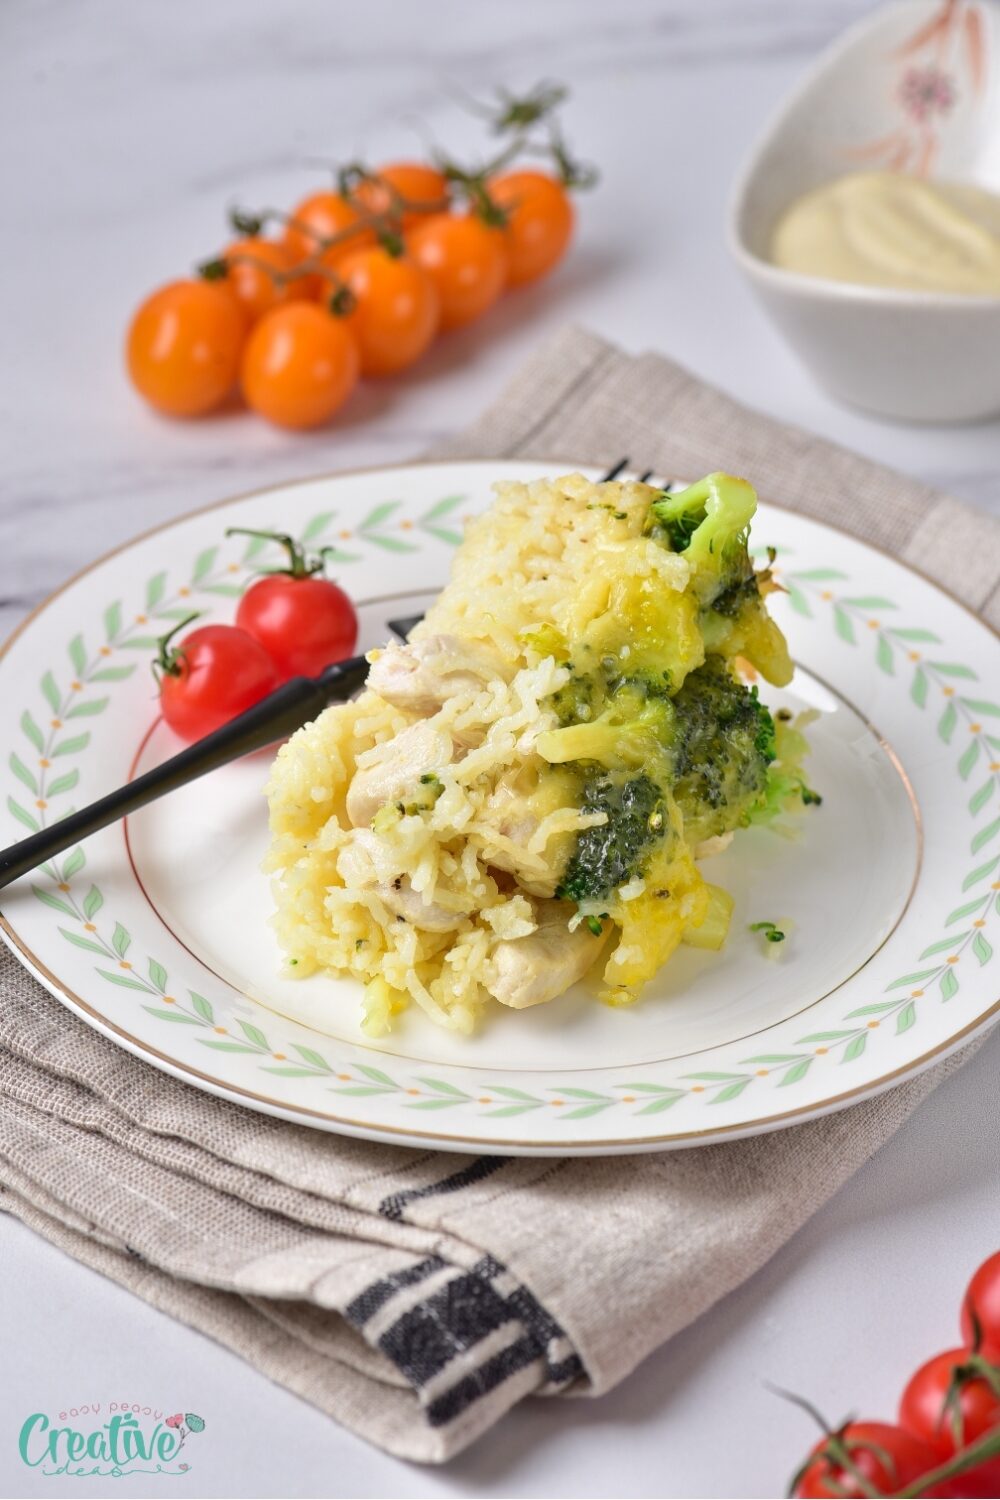 A plate with a delicious piece of easy chicken casserole on it, ready to be savored and enjoyed.